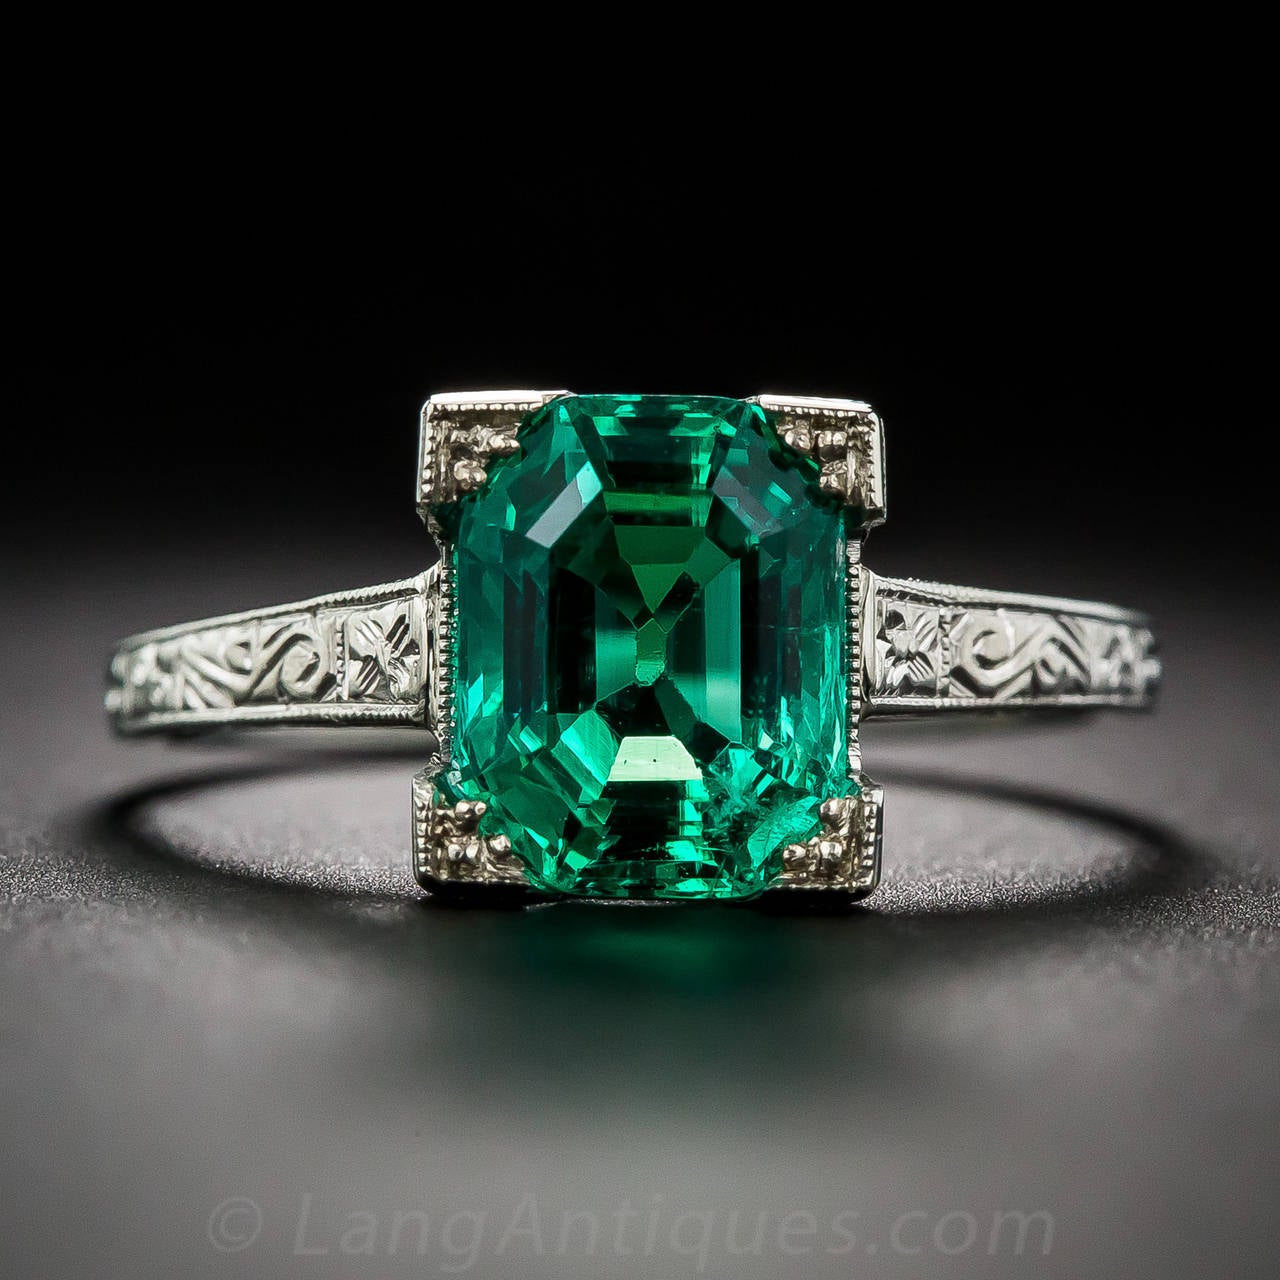 Only a precious few (almost none!), gem-quality, Colombian emeralds from the old Muzo mine are free of any treatments (including customary oil) whatsoever, and this ultra-rare and radiant, electric-green gem is a spectacular and shining example.